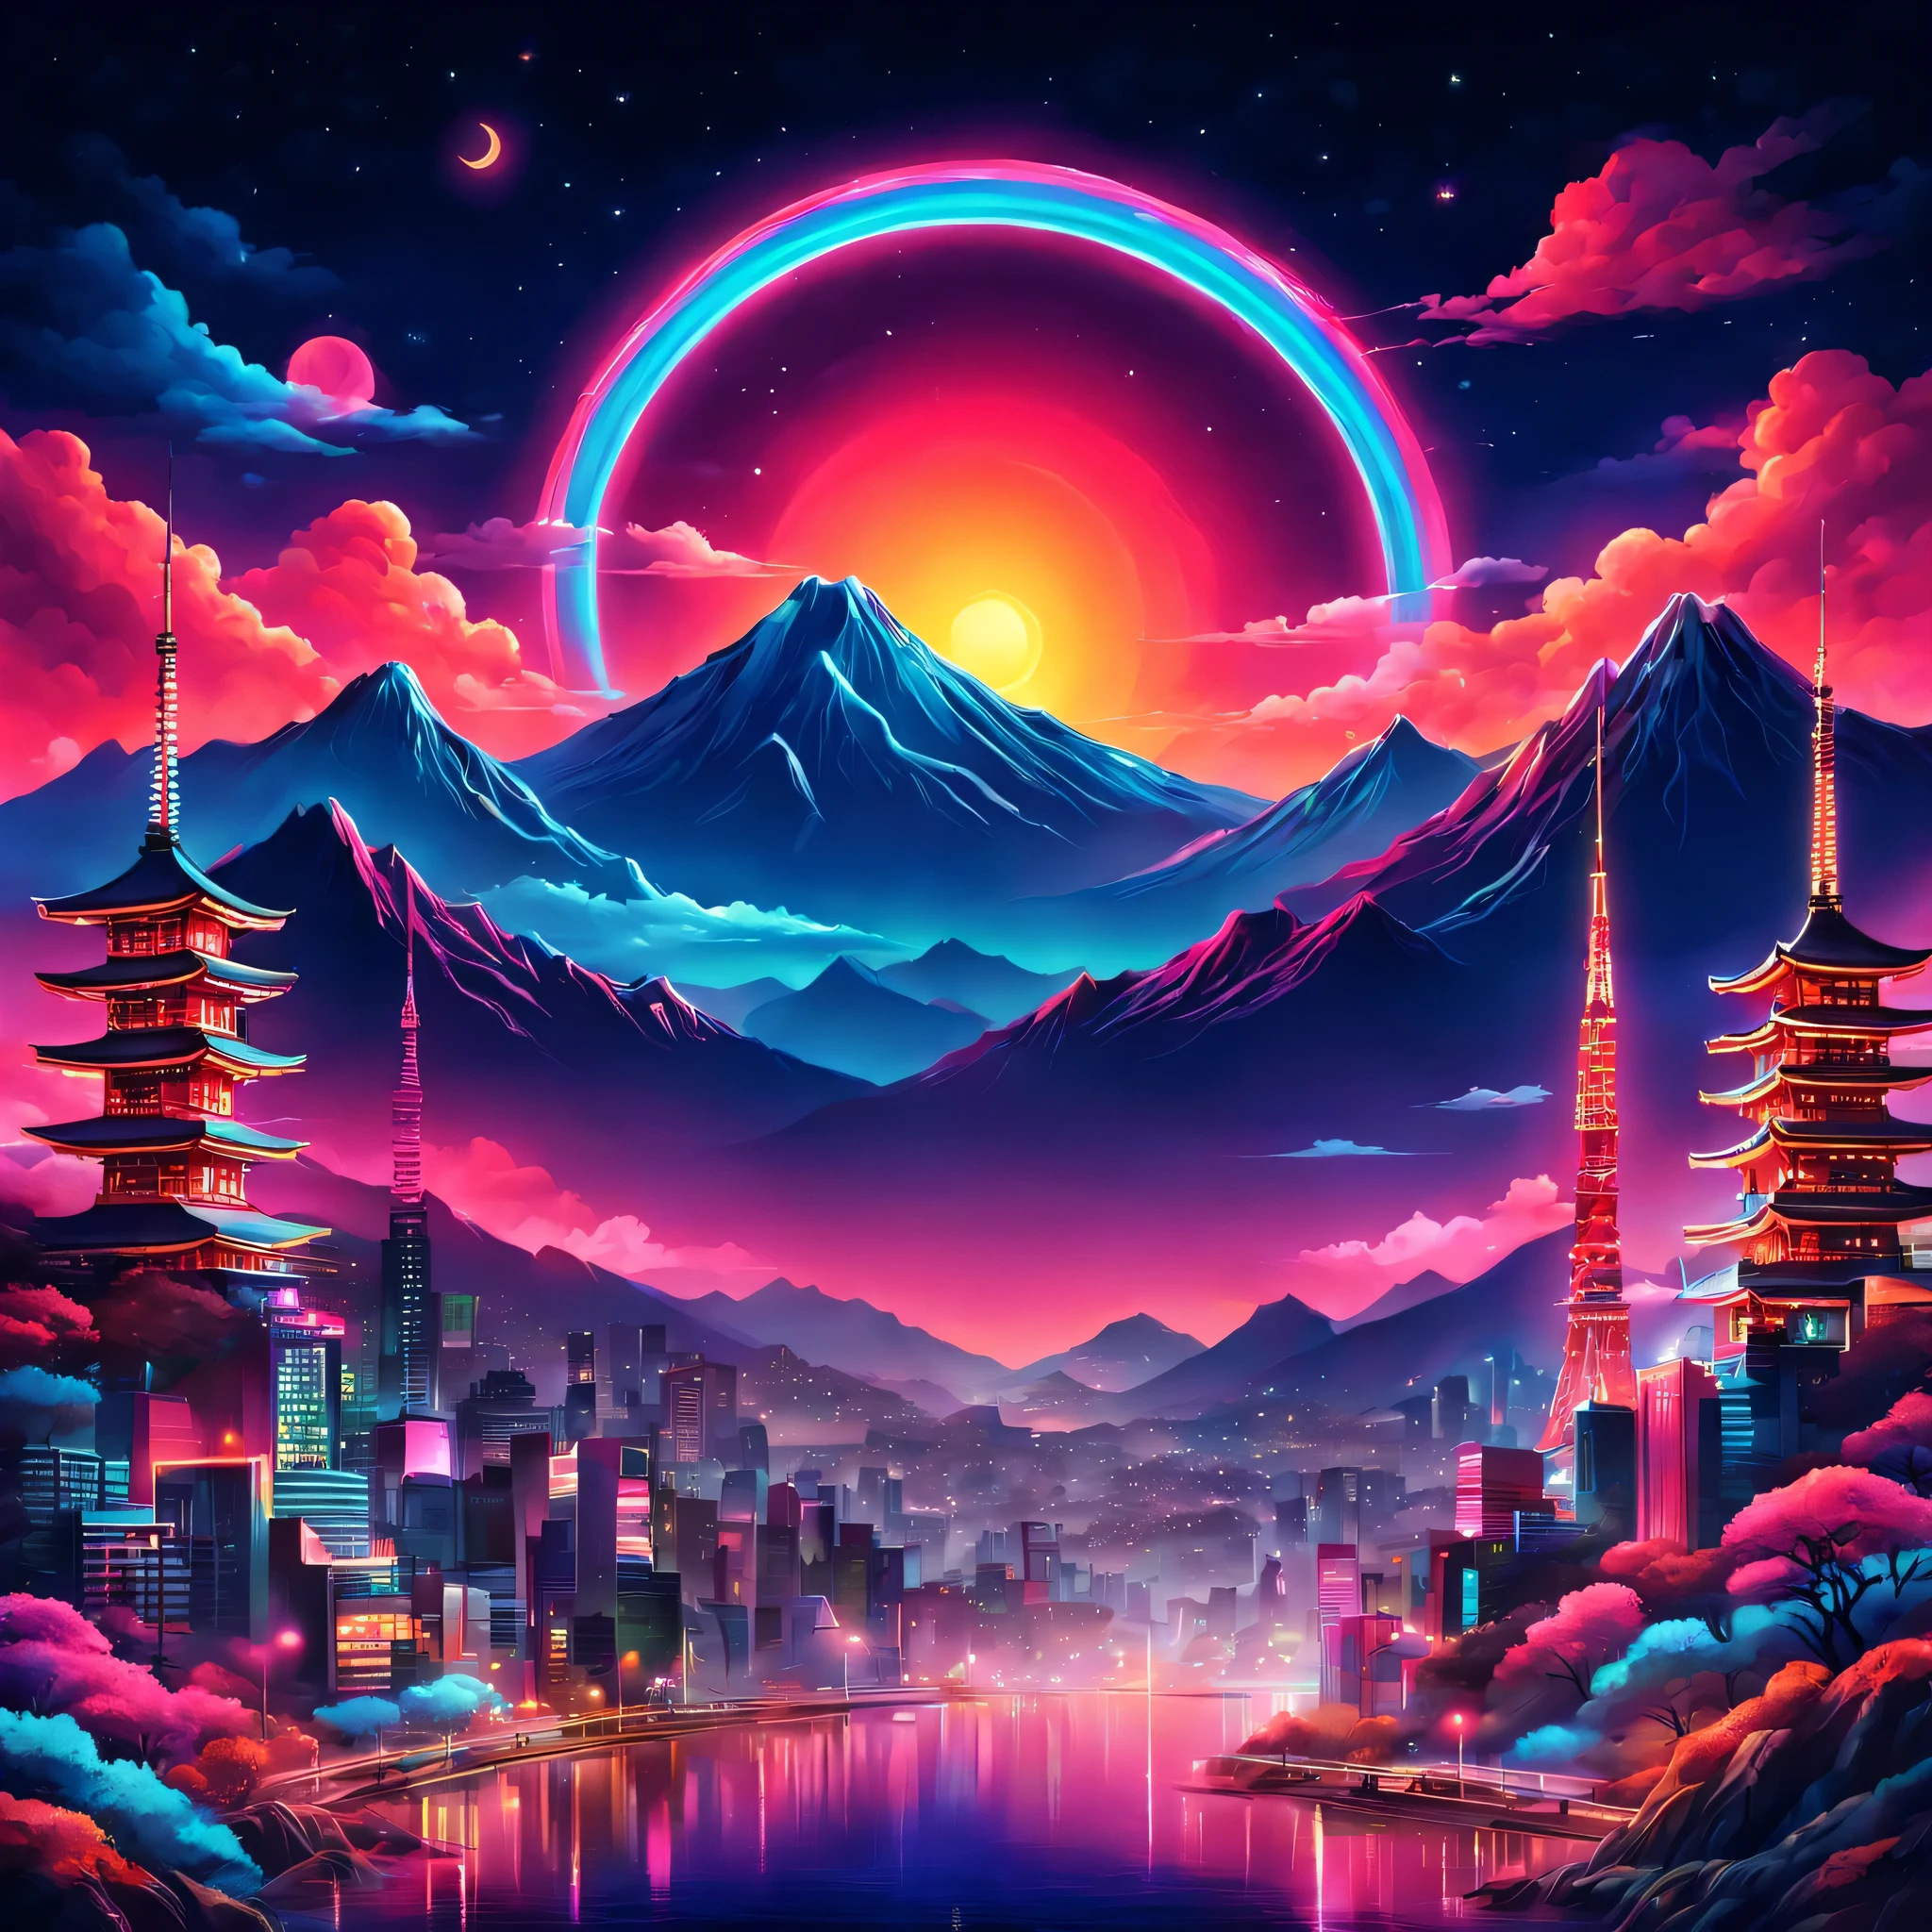 The aesthetics of Vaporwave,Landscape painting,retro vibes,Japan colored in neon colors,Fuji Mountain,moon,star,cloud,aurora,beautiful,rich colors,flash,Very flash,Cast colorful spells,Draw in neon colors on a dark background,Fusion of good old Japanese scenery and modern art,Pop Illustration,poster,perfect composition,Design that expresses Japan,works of art,Bright colors、black,pink,Light blue,purple